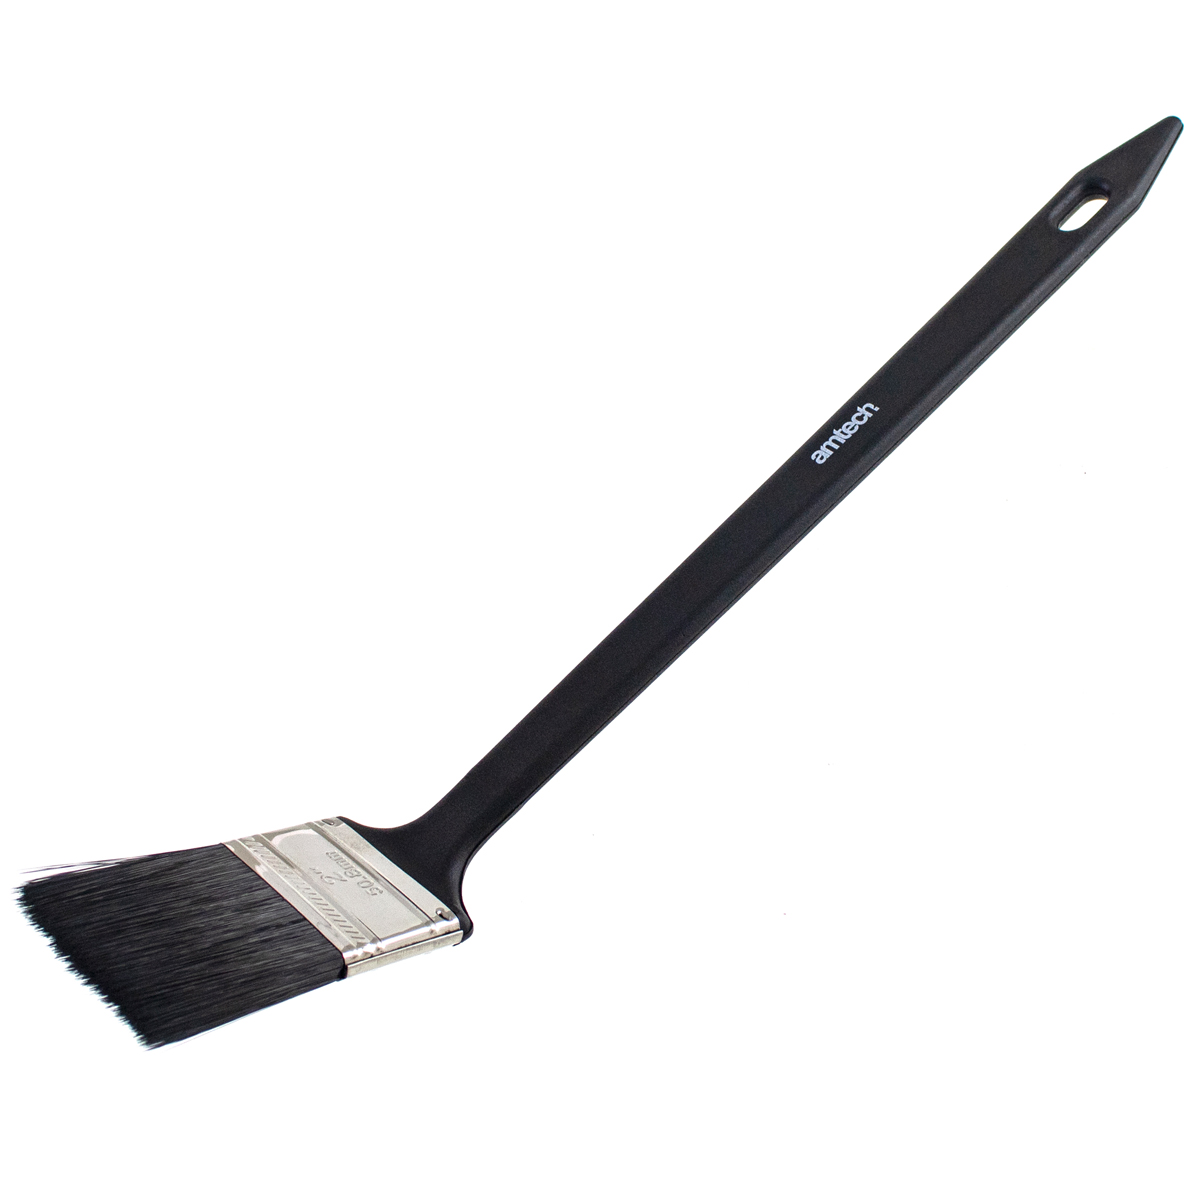 x2 Plasterers Brush  6" INCH  EXTRA LARGE AM-TECH PROFESSIONAL WALL PAINT BRUSH 